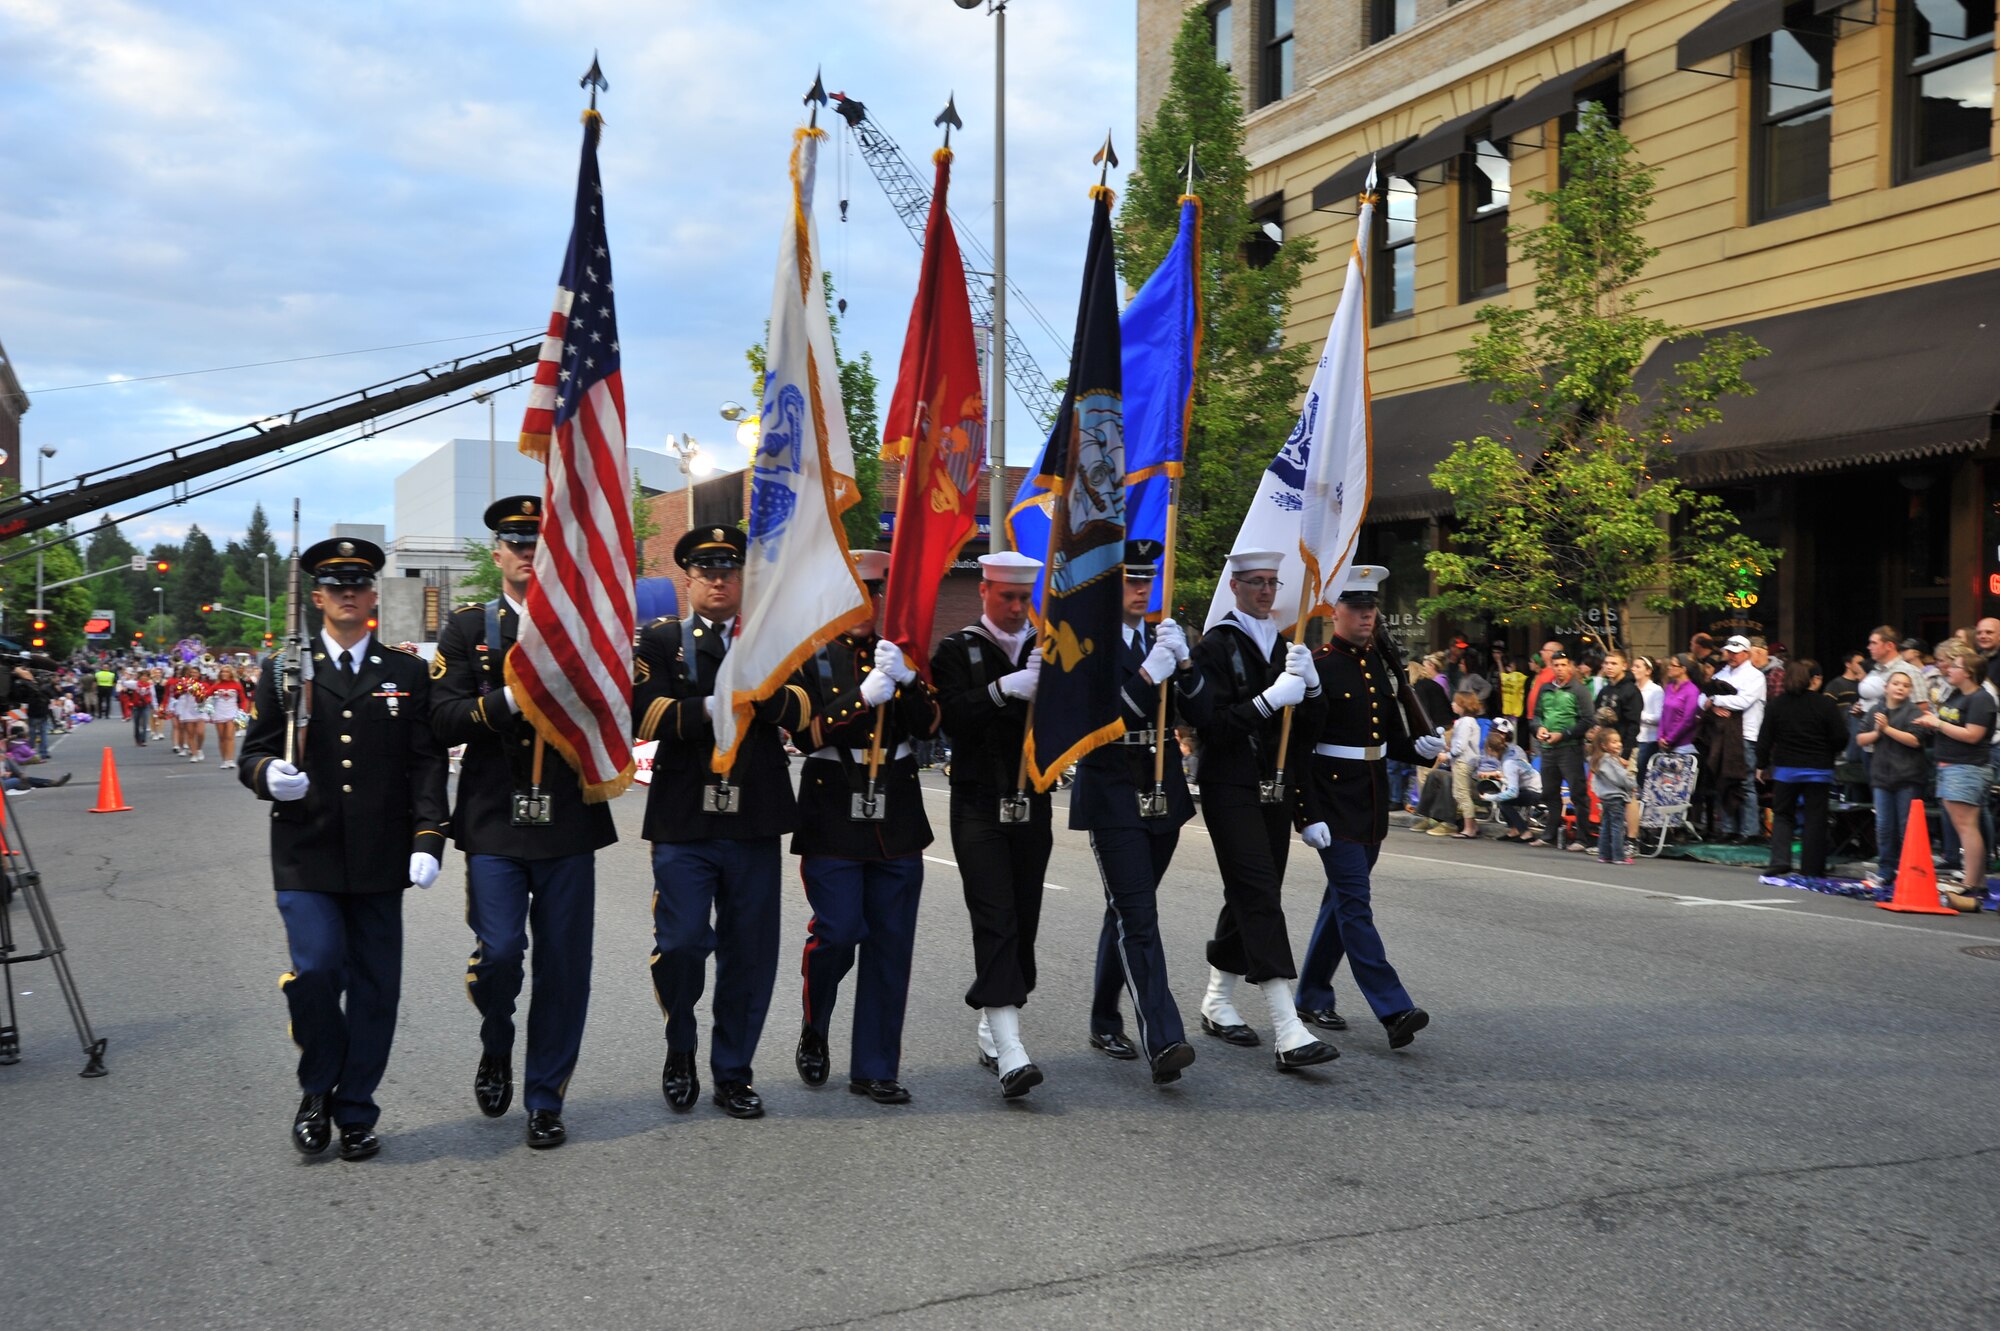 A joint-service color guard team kicks off the Lilac Festival 2014 Armed Forced Torchlight Parade in Spokane Wash., May 17, 2014. The 75-year-old tradition is made to honor service members of both the past and present. (U.S. Air Force photo by Staff Sgt. Veronica Montes/Released) 